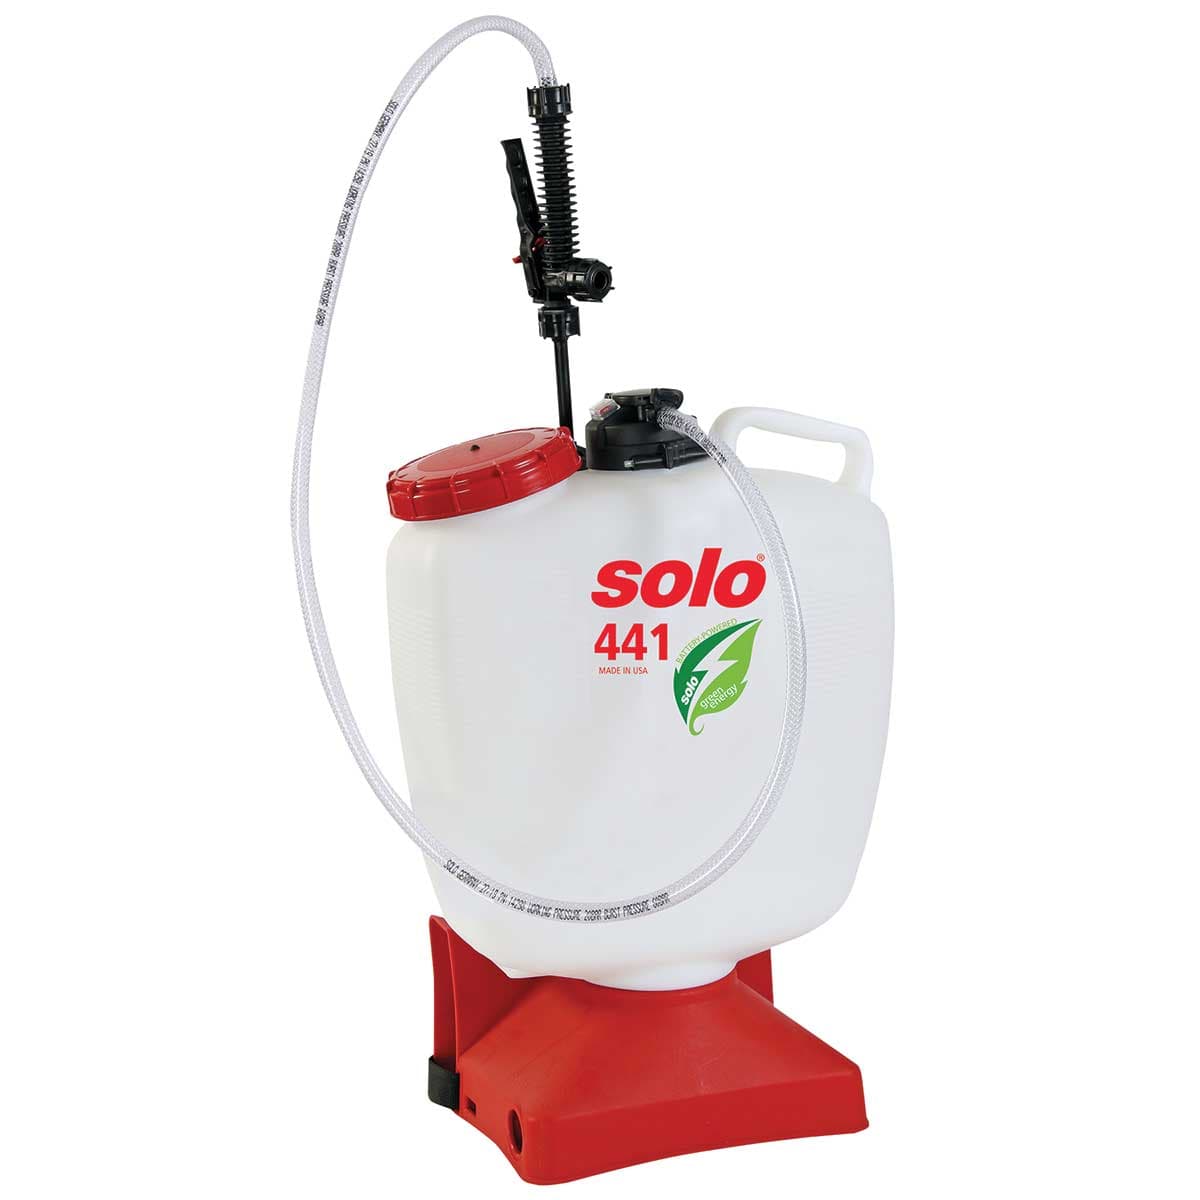 Solo 441 4 Gallon Battery-Powered Backpack Sprayer